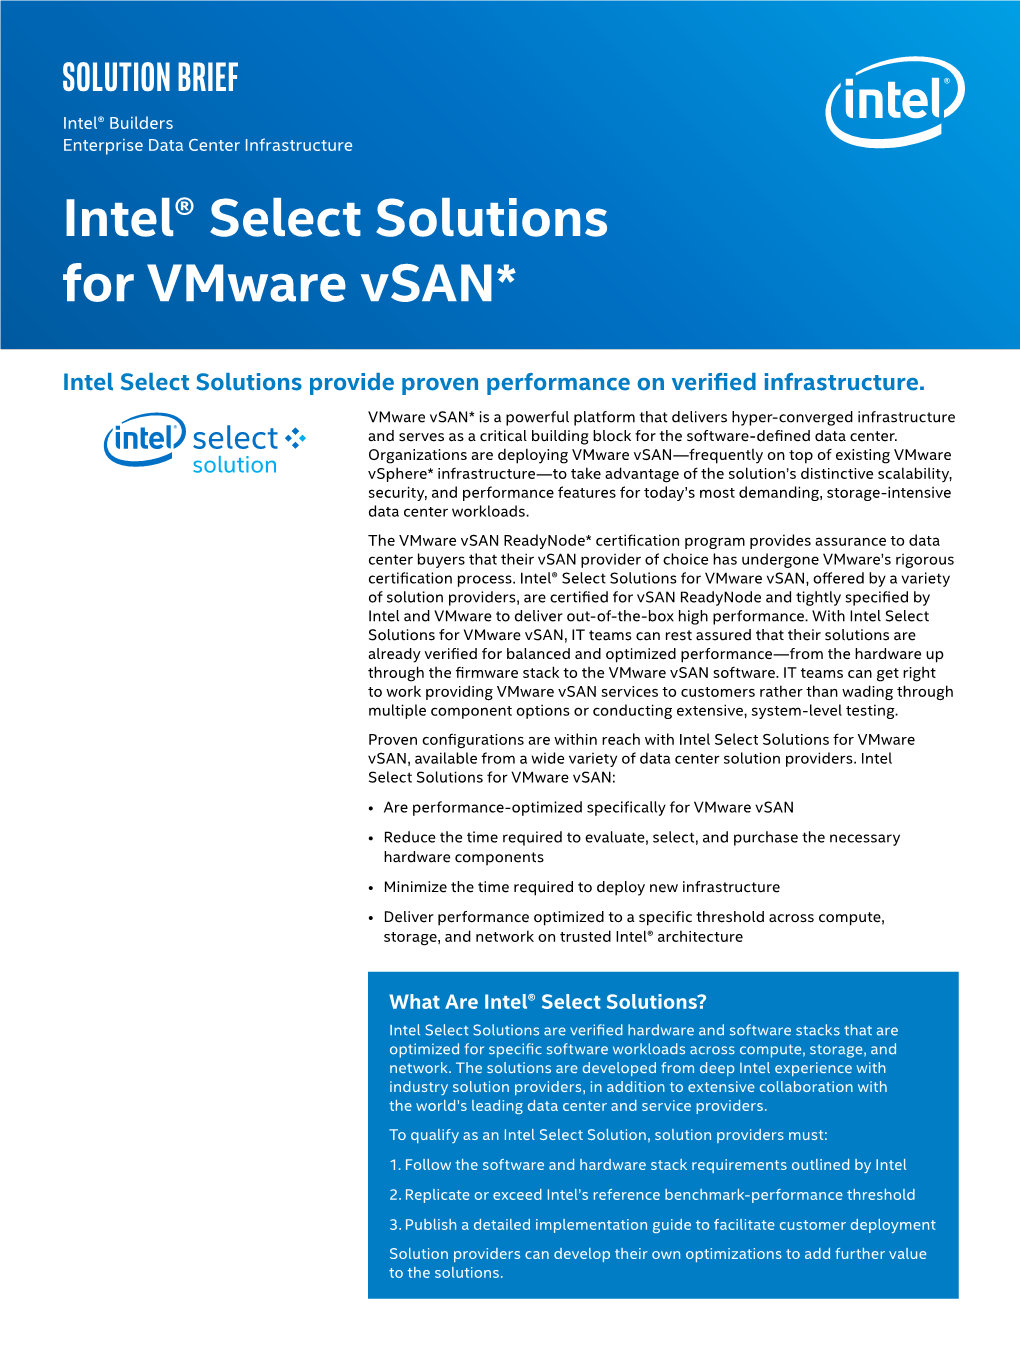 Intel® Select Solutions for Vmware Vsan*